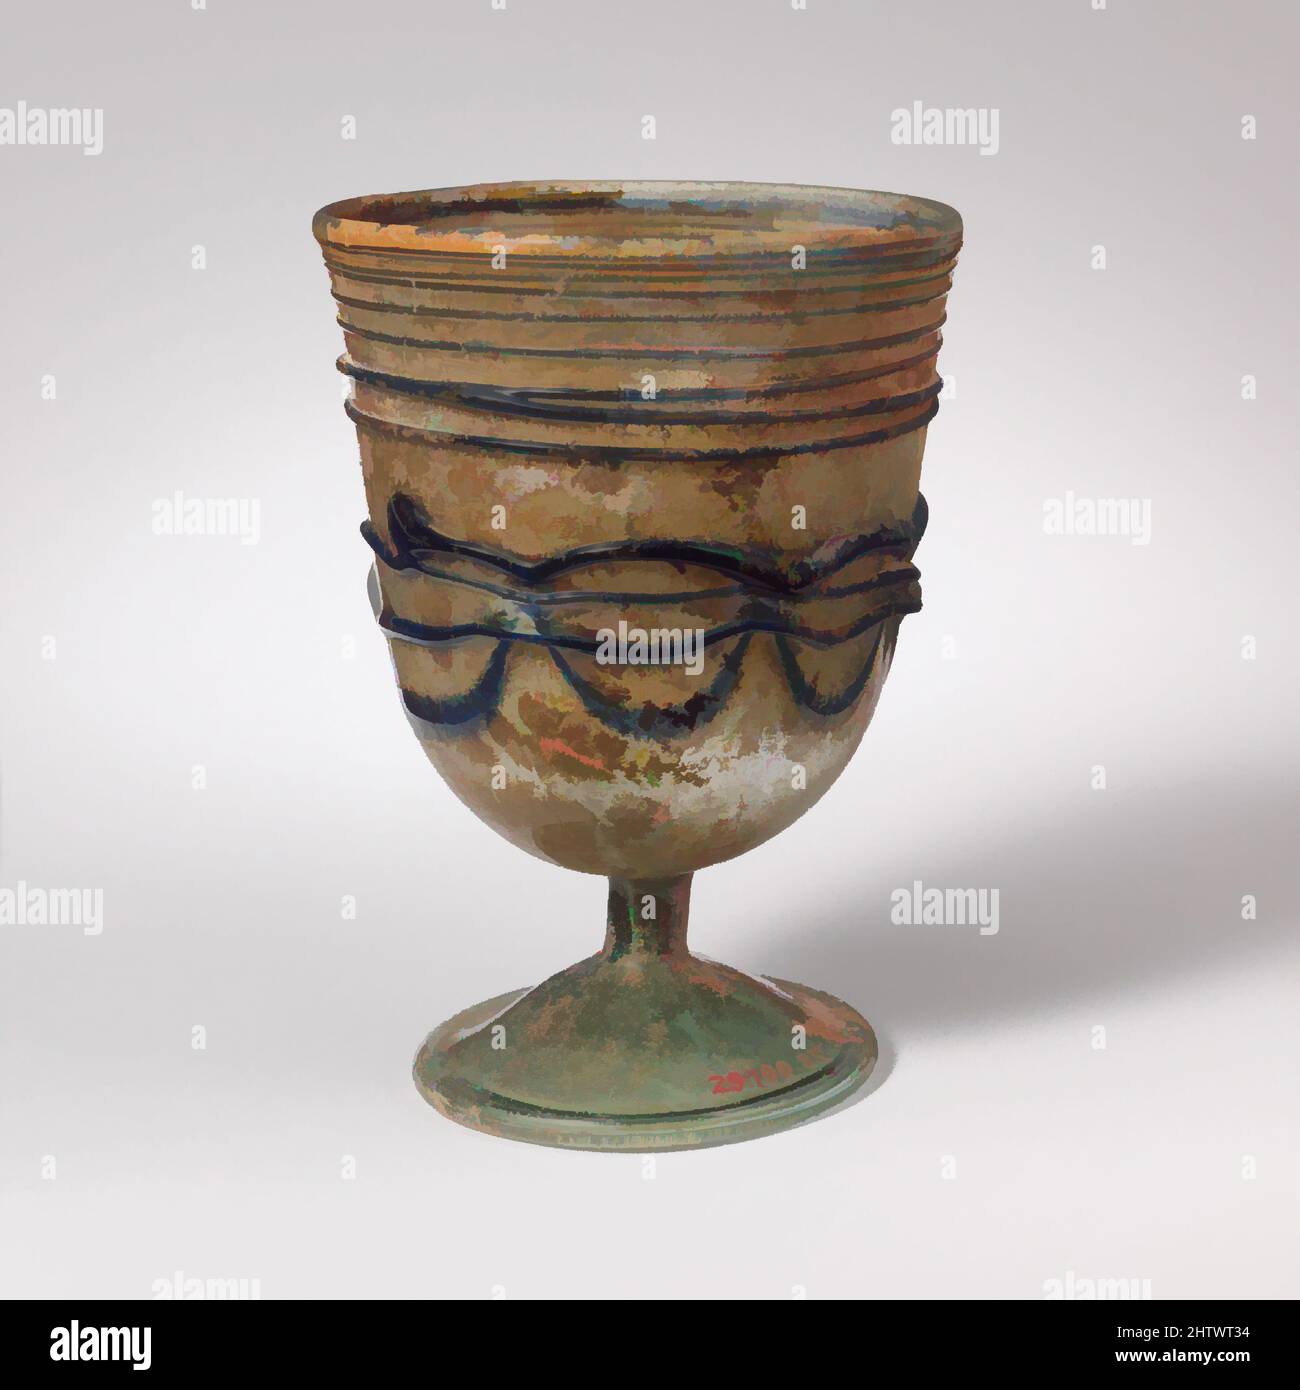 Art inspired by Glass stemmed cup, Late Imperial or Early Byzantine, 4th–5th century A.D. or later, Roman, Palestinian, Glass; blown and trailed, H.: 3 3/4 in. (9.5 cm), Glass, Translucent pale blue green; trails in translucent cobalt blue., Thickened, vertical rim, with slightly, Classic works modernized by Artotop with a splash of modernity. Shapes, color and value, eye-catching visual impact on art. Emotions through freedom of artworks in a contemporary way. A timeless message pursuing a wildly creative new direction. Artists turning to the digital medium and creating the Artotop NFT Stock Photo